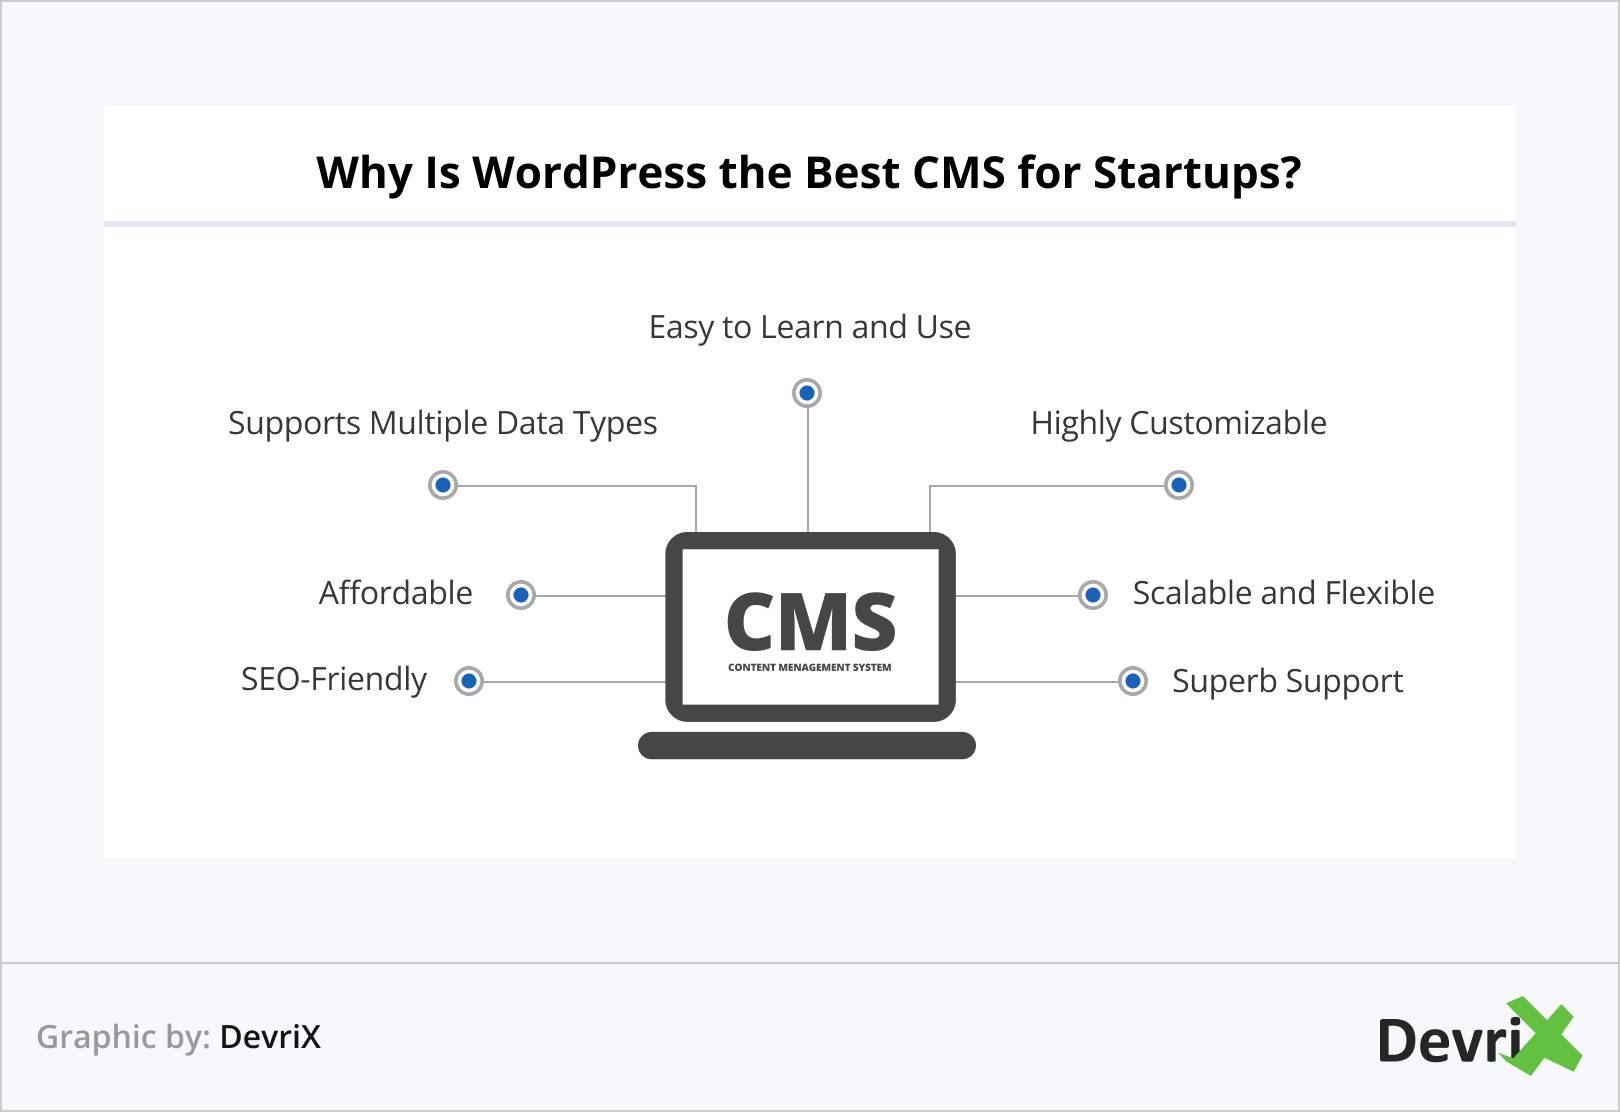 Why Is WordPress the Best CMS for Startups